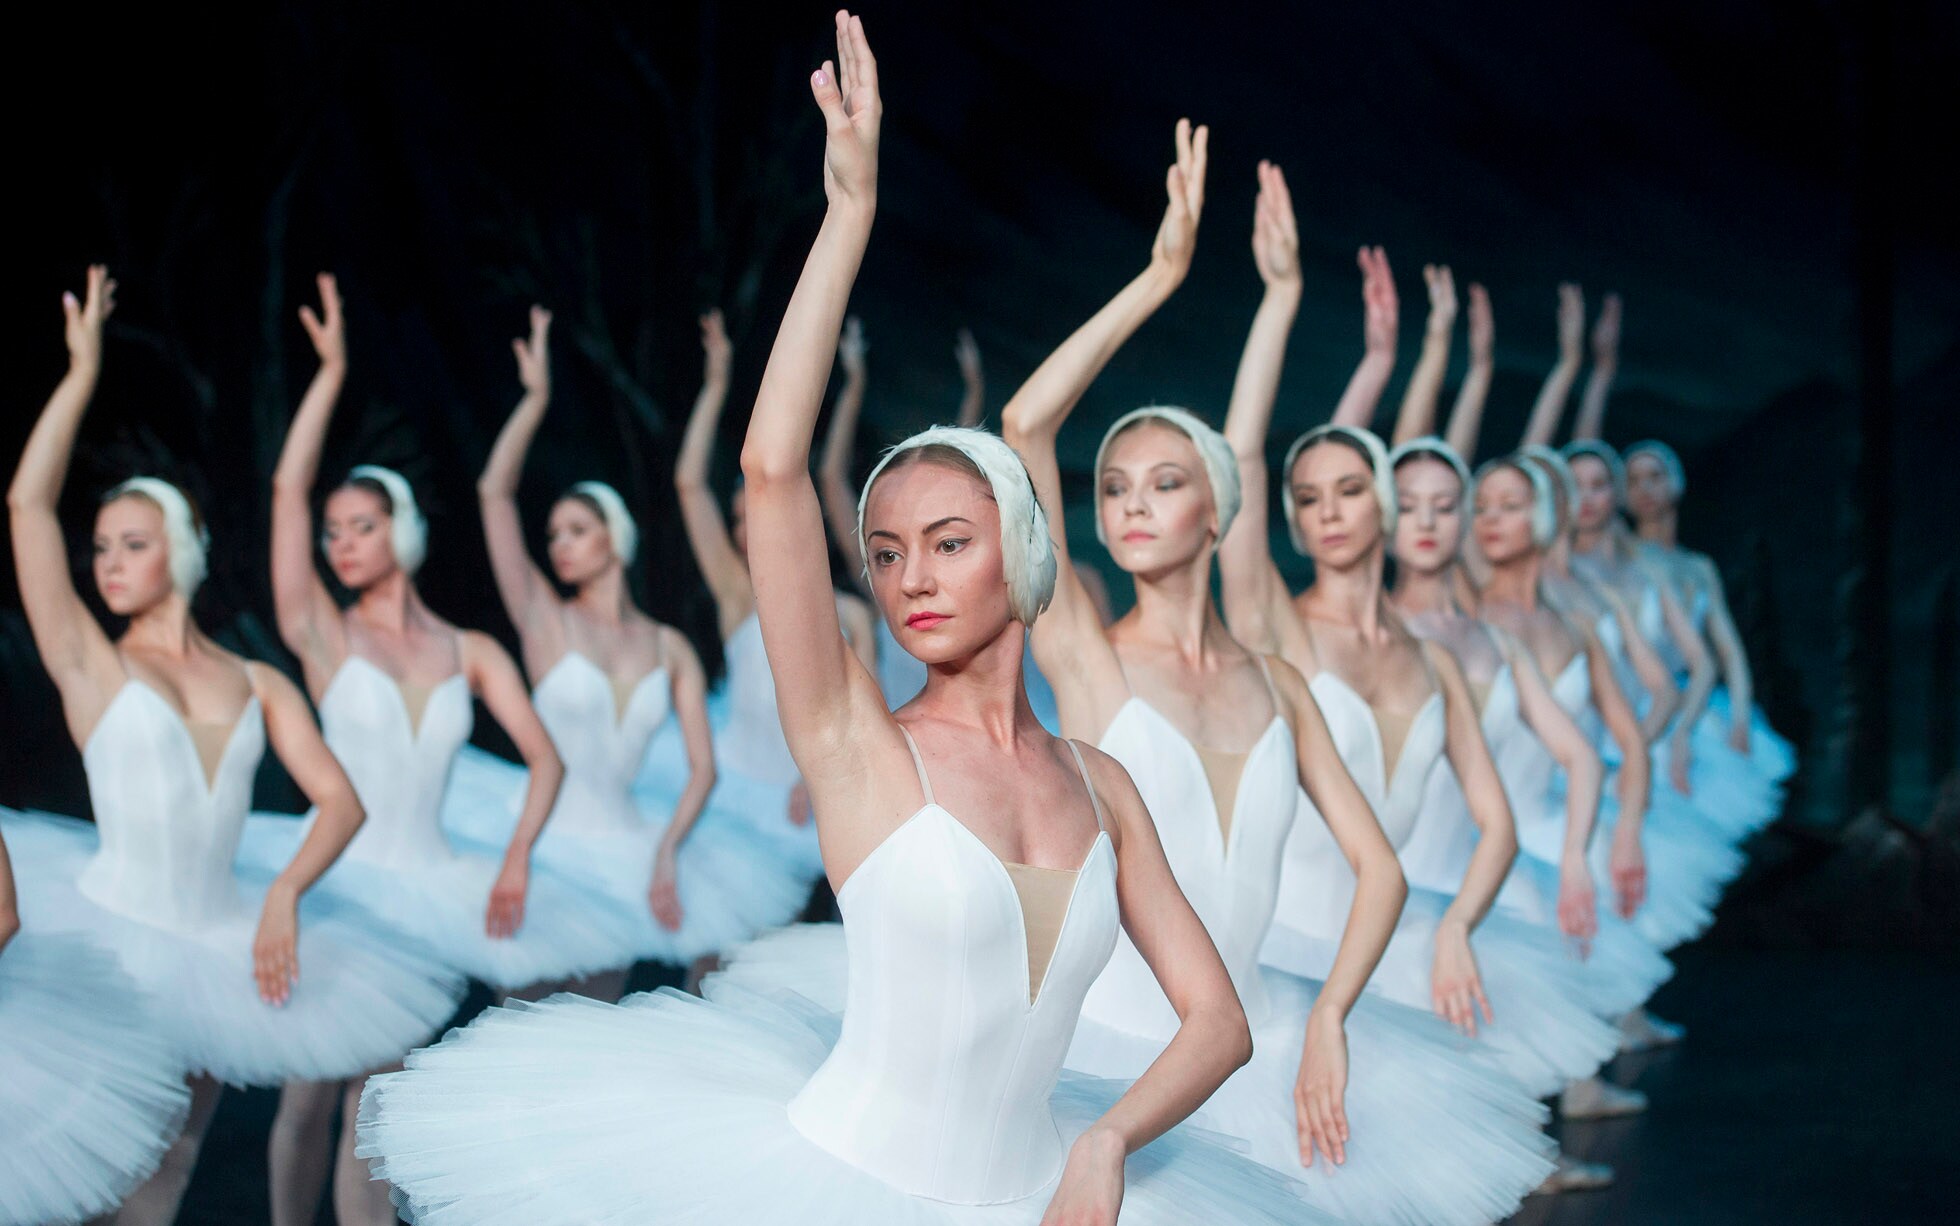 St. Petersburg Ballet Director Compares Ballet To What Art Form